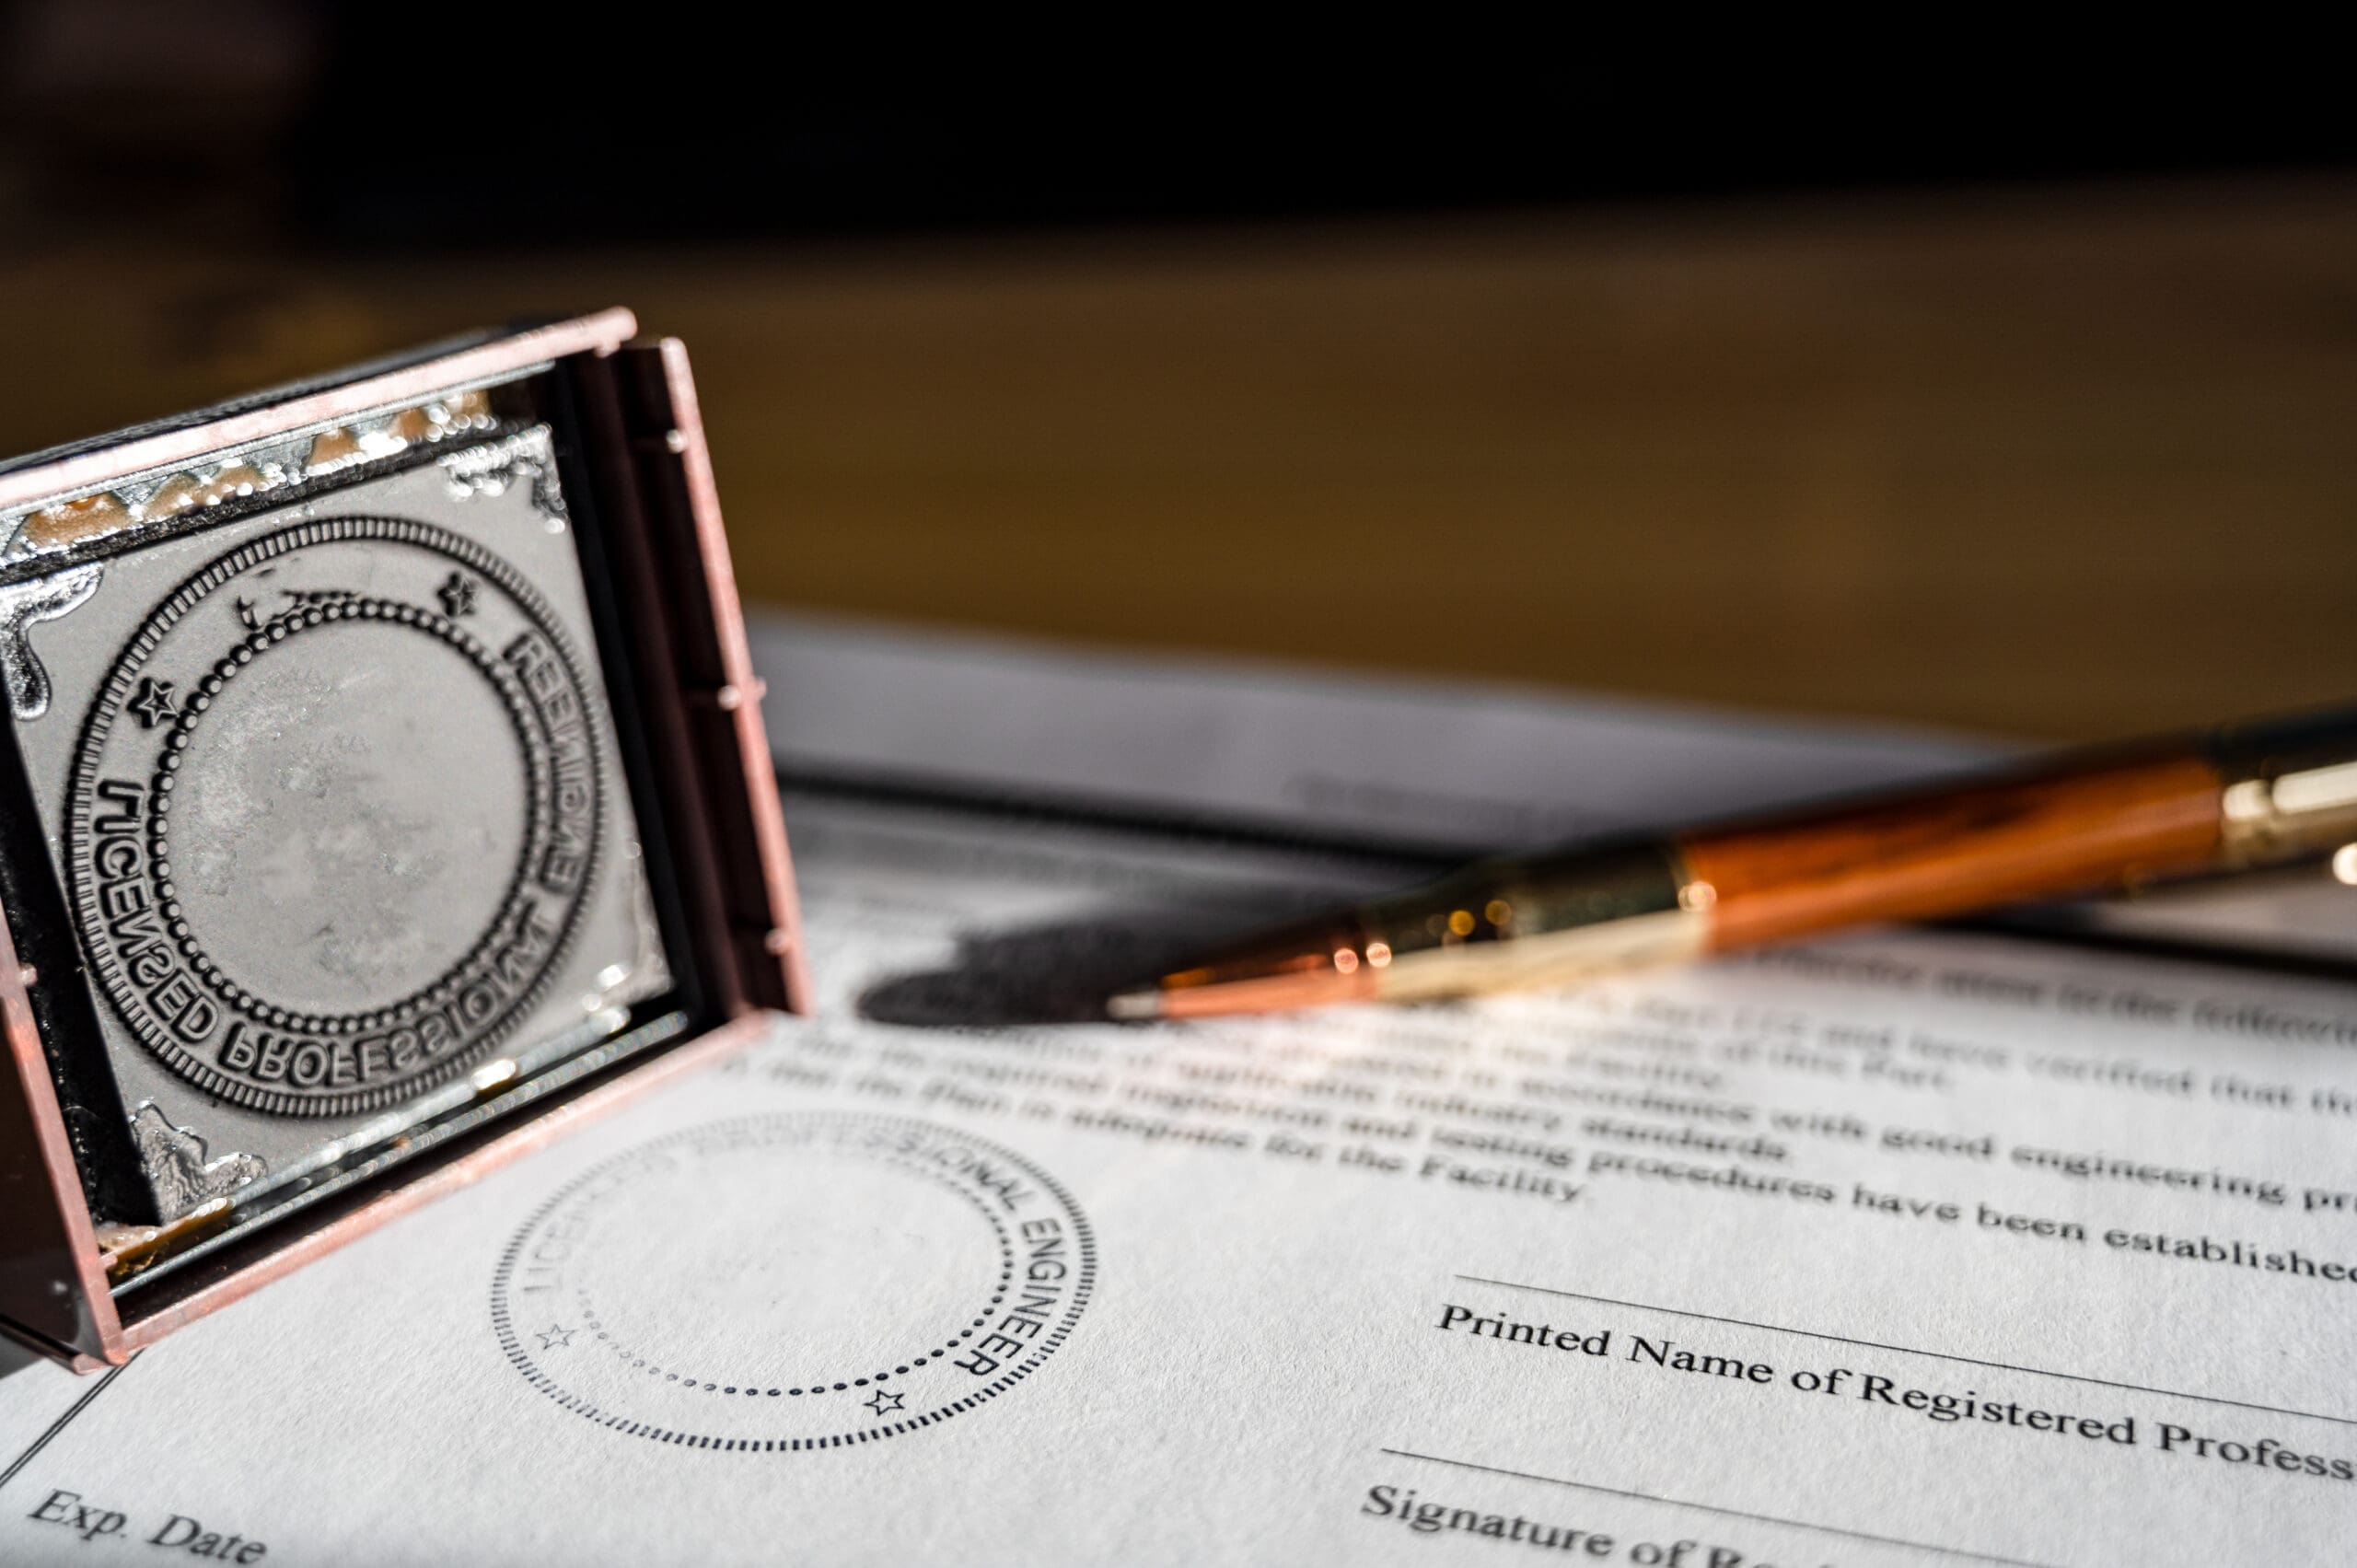 A pen rests on a document next to an engraved professional seal stamp. The document includes spaces for an expiration date, printed name, and signature of a registered professional. The image is well-lit with shadows enhancing the texture of the paper.